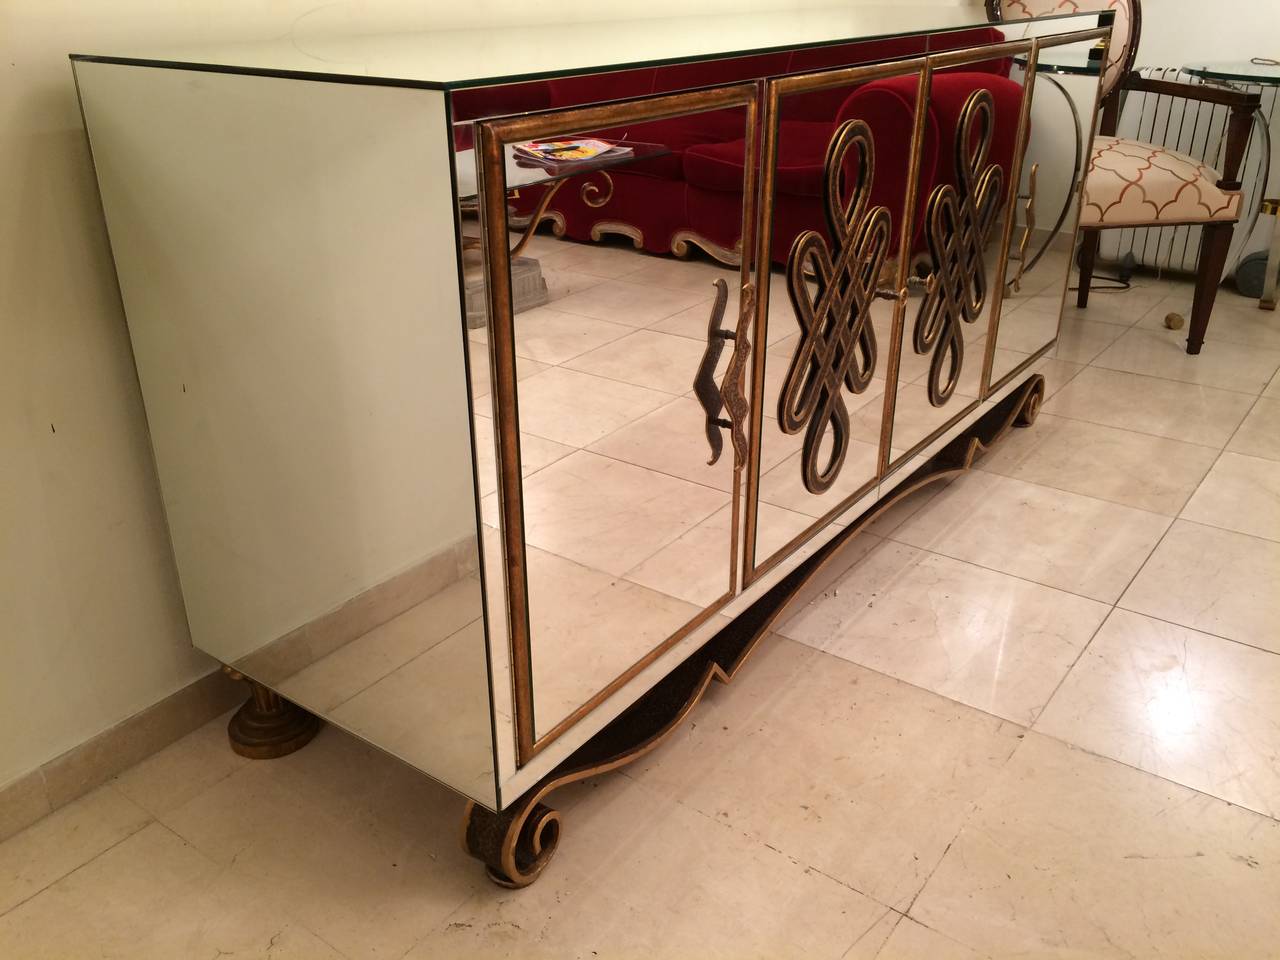 Unique French 1940s mirrored buffet opening with four doors.
Base , handles and doors decoration in wrought iron.
Inside with shelves in dark grey patina.
In the style of Poillerât.